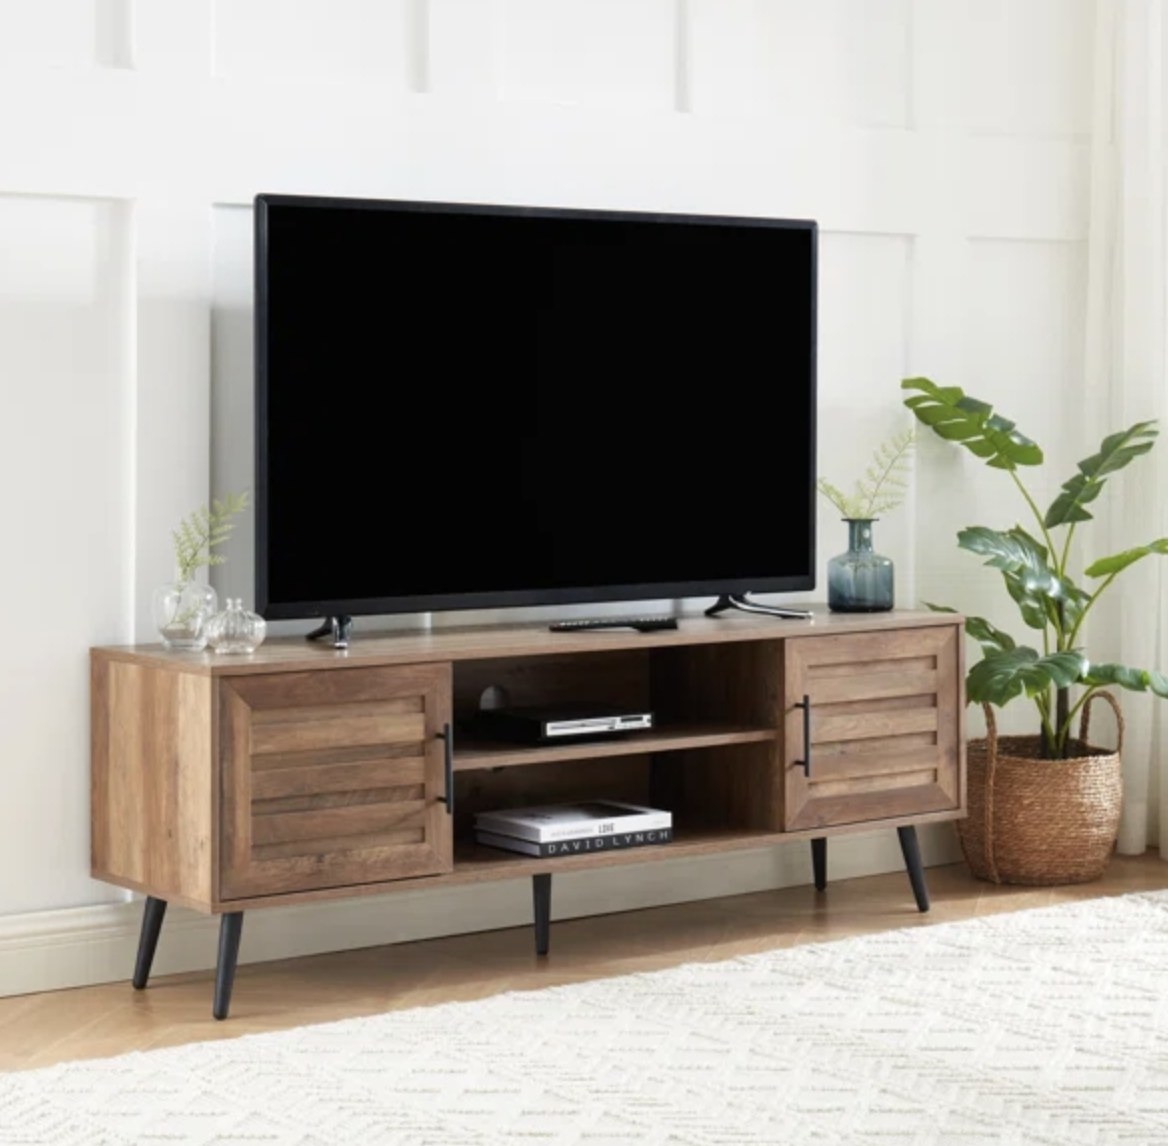 The brown stand has two open drawers and two spots with storage with doors